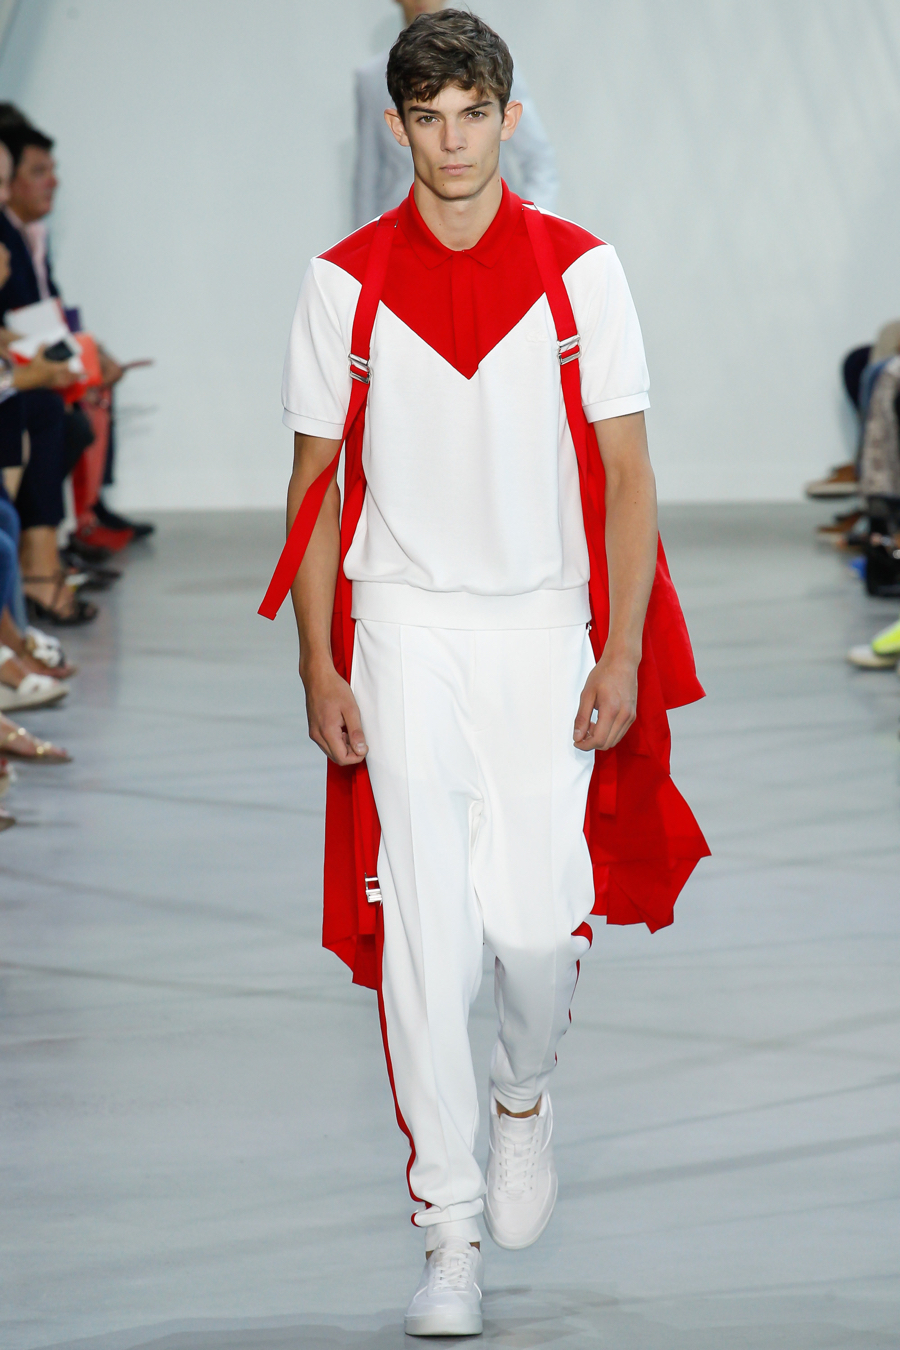 Lacoste Spring Summer 2016 Menswear Collection New York Fashion Week 004